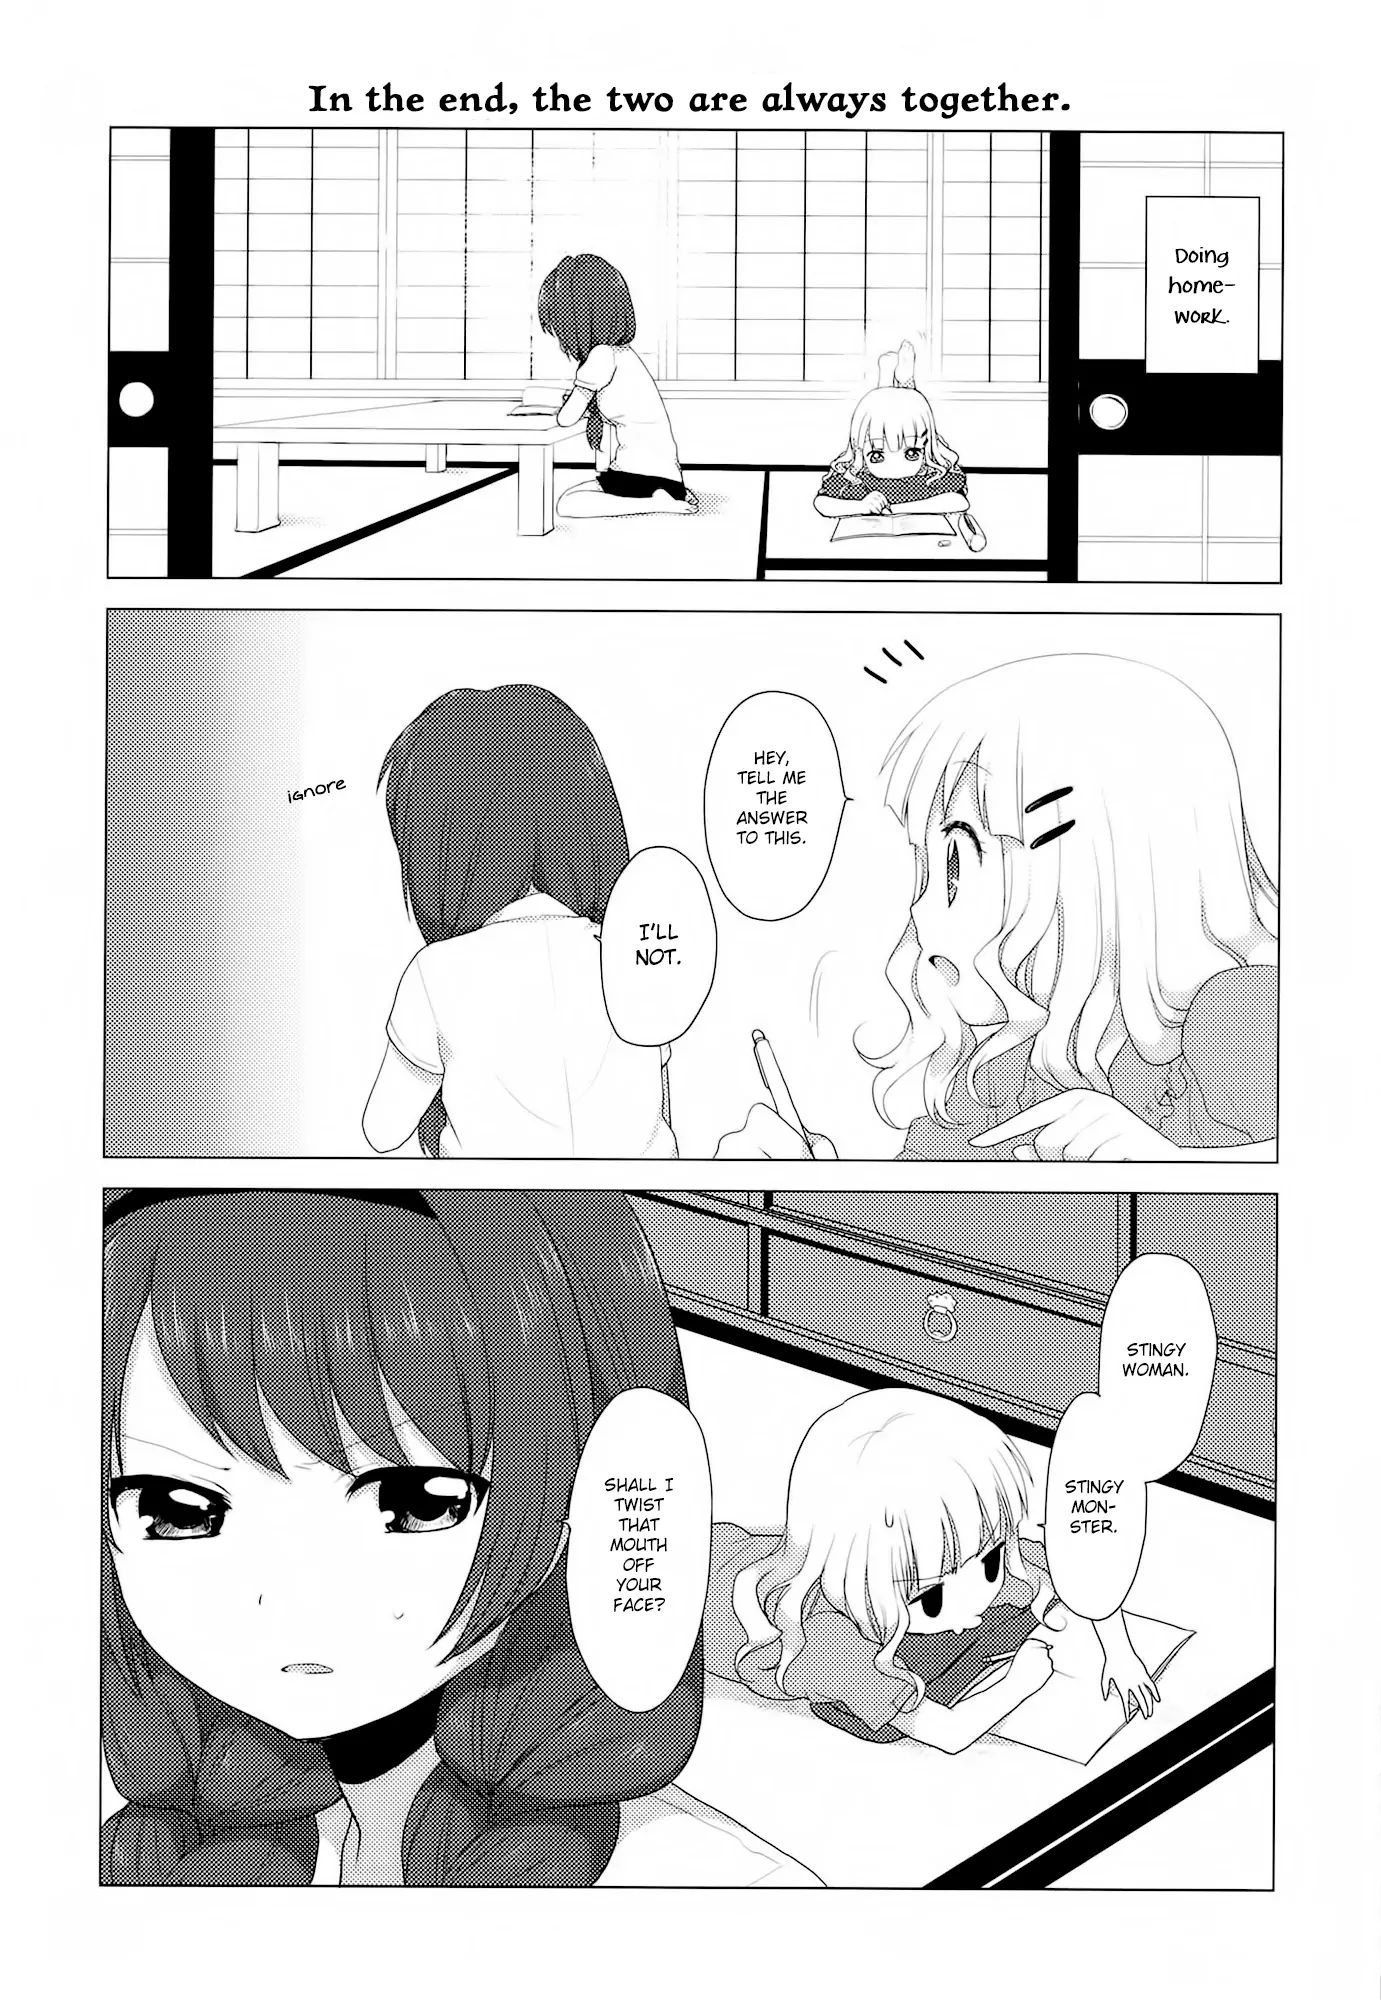 Yuru Yuri Vol.2 Chapter 20: A Tale Of How Even If You Finish Summer's Homework, There's Still Life's Homework Left - Picture 3